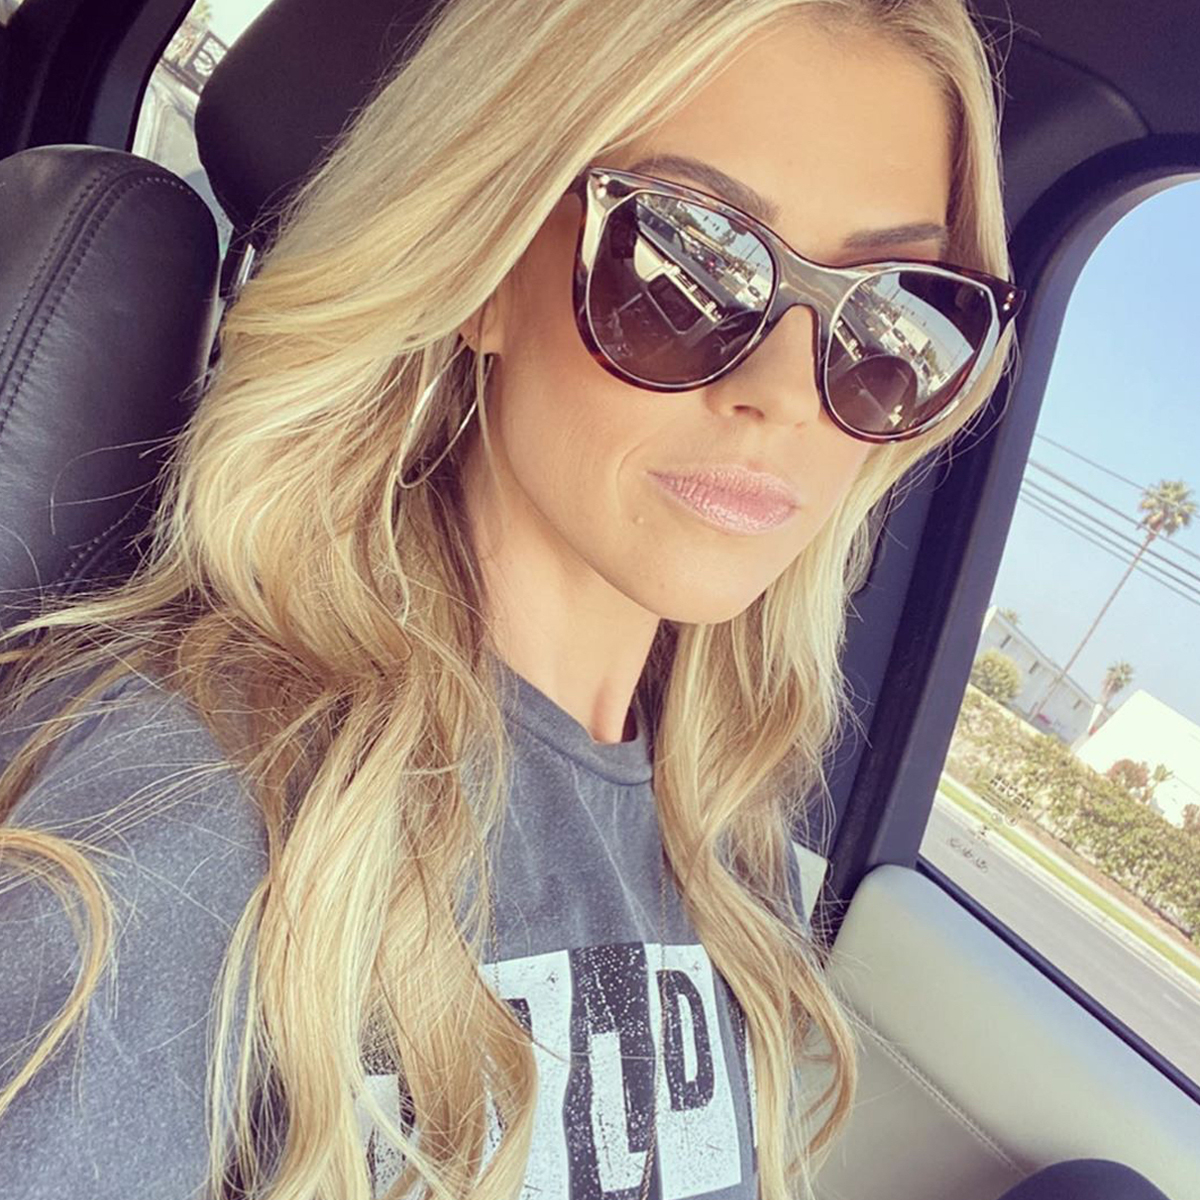 Christina Anstead responds to fans’ concerns that she is “really skinny”